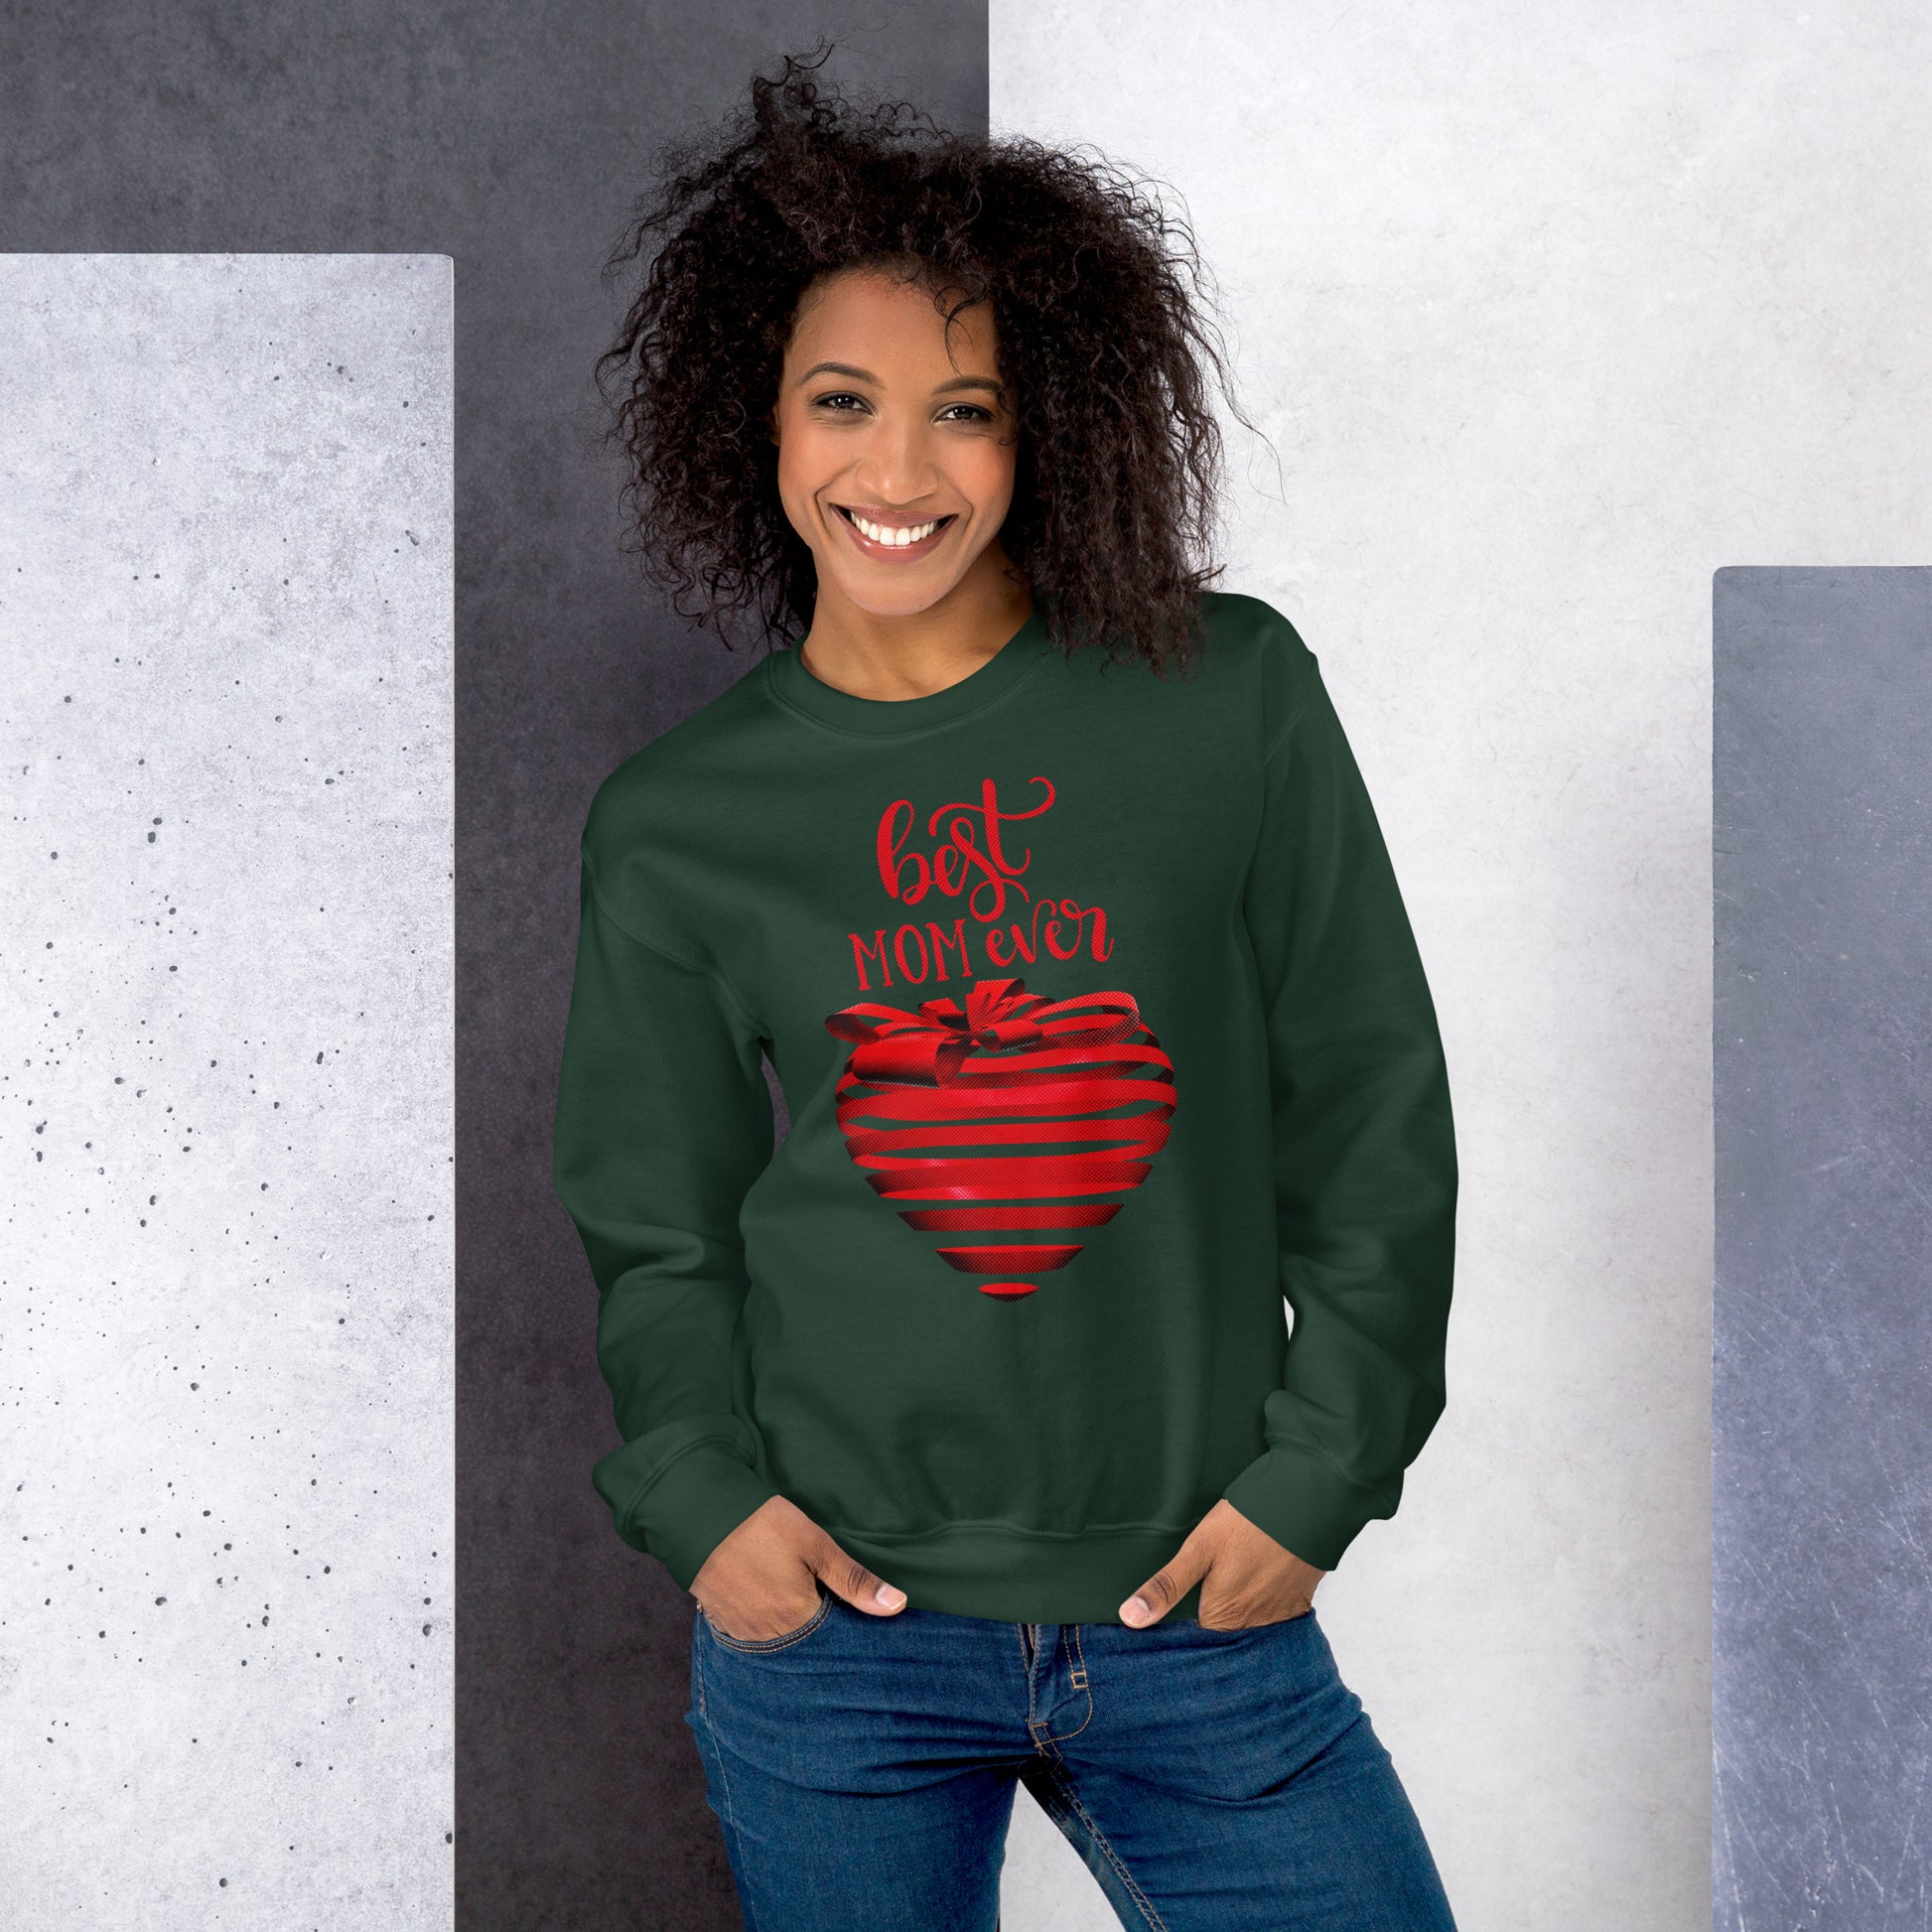 Women with forest green sweater with red text best MOM Ever and red heart